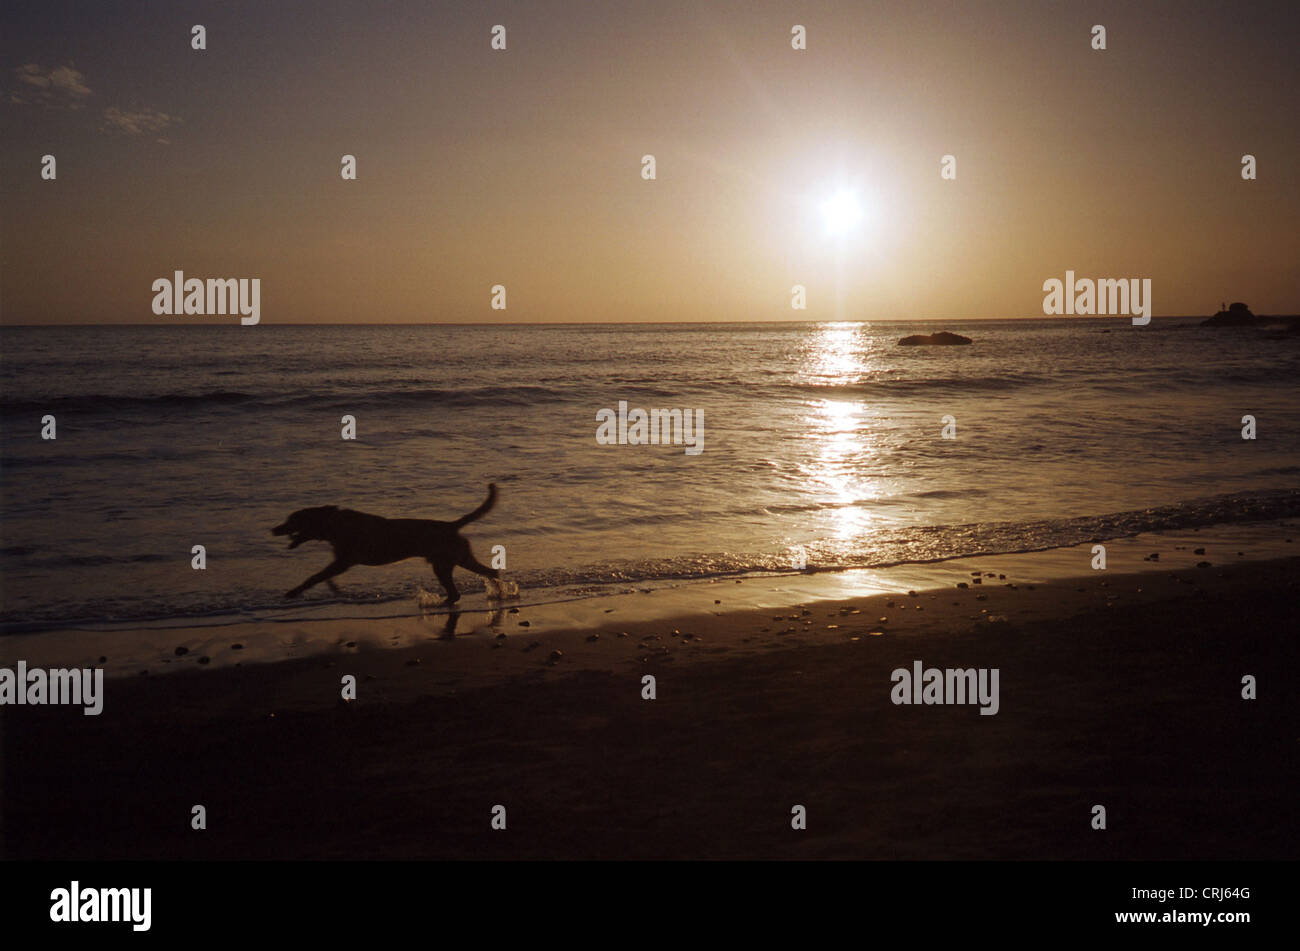 A dog on the beach in front of the setting sun Stock Photo